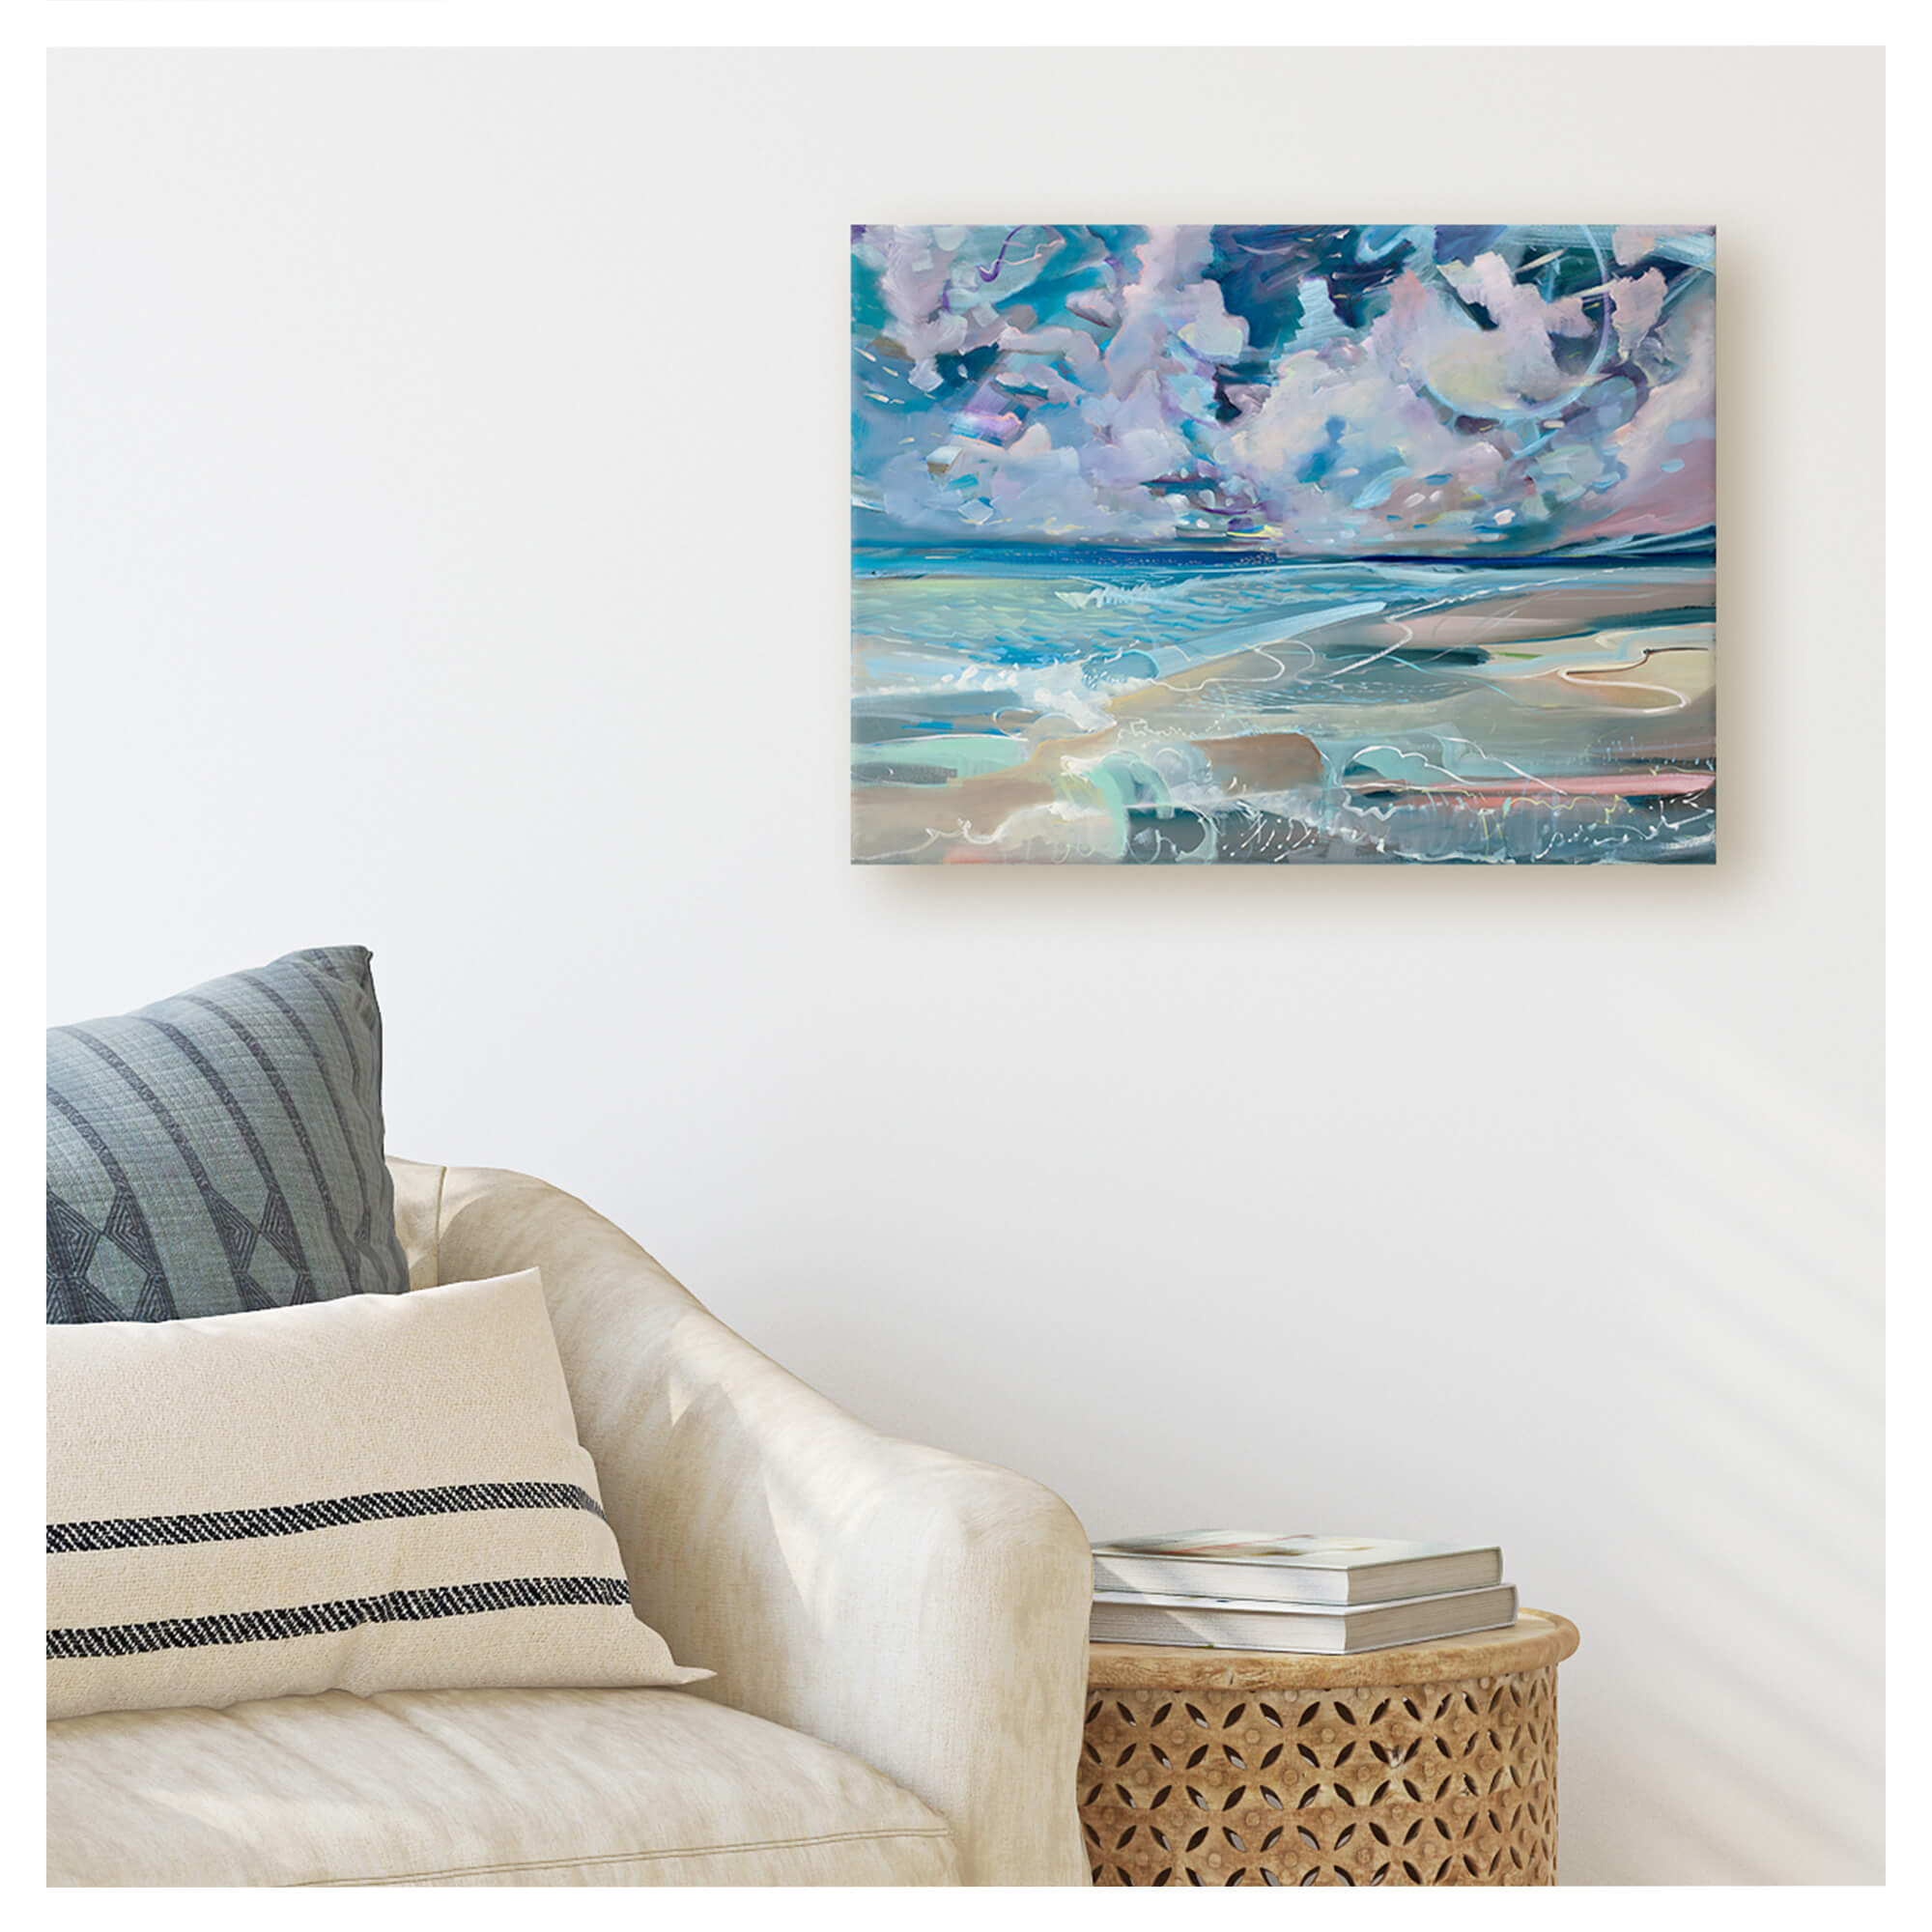 A wall art of an original painting featuring an abstract seascape showing Hawaii's tranquil waters and pastel-colored sky using oil on canvas by famous Hawaii artist Saumolia Puapuaga